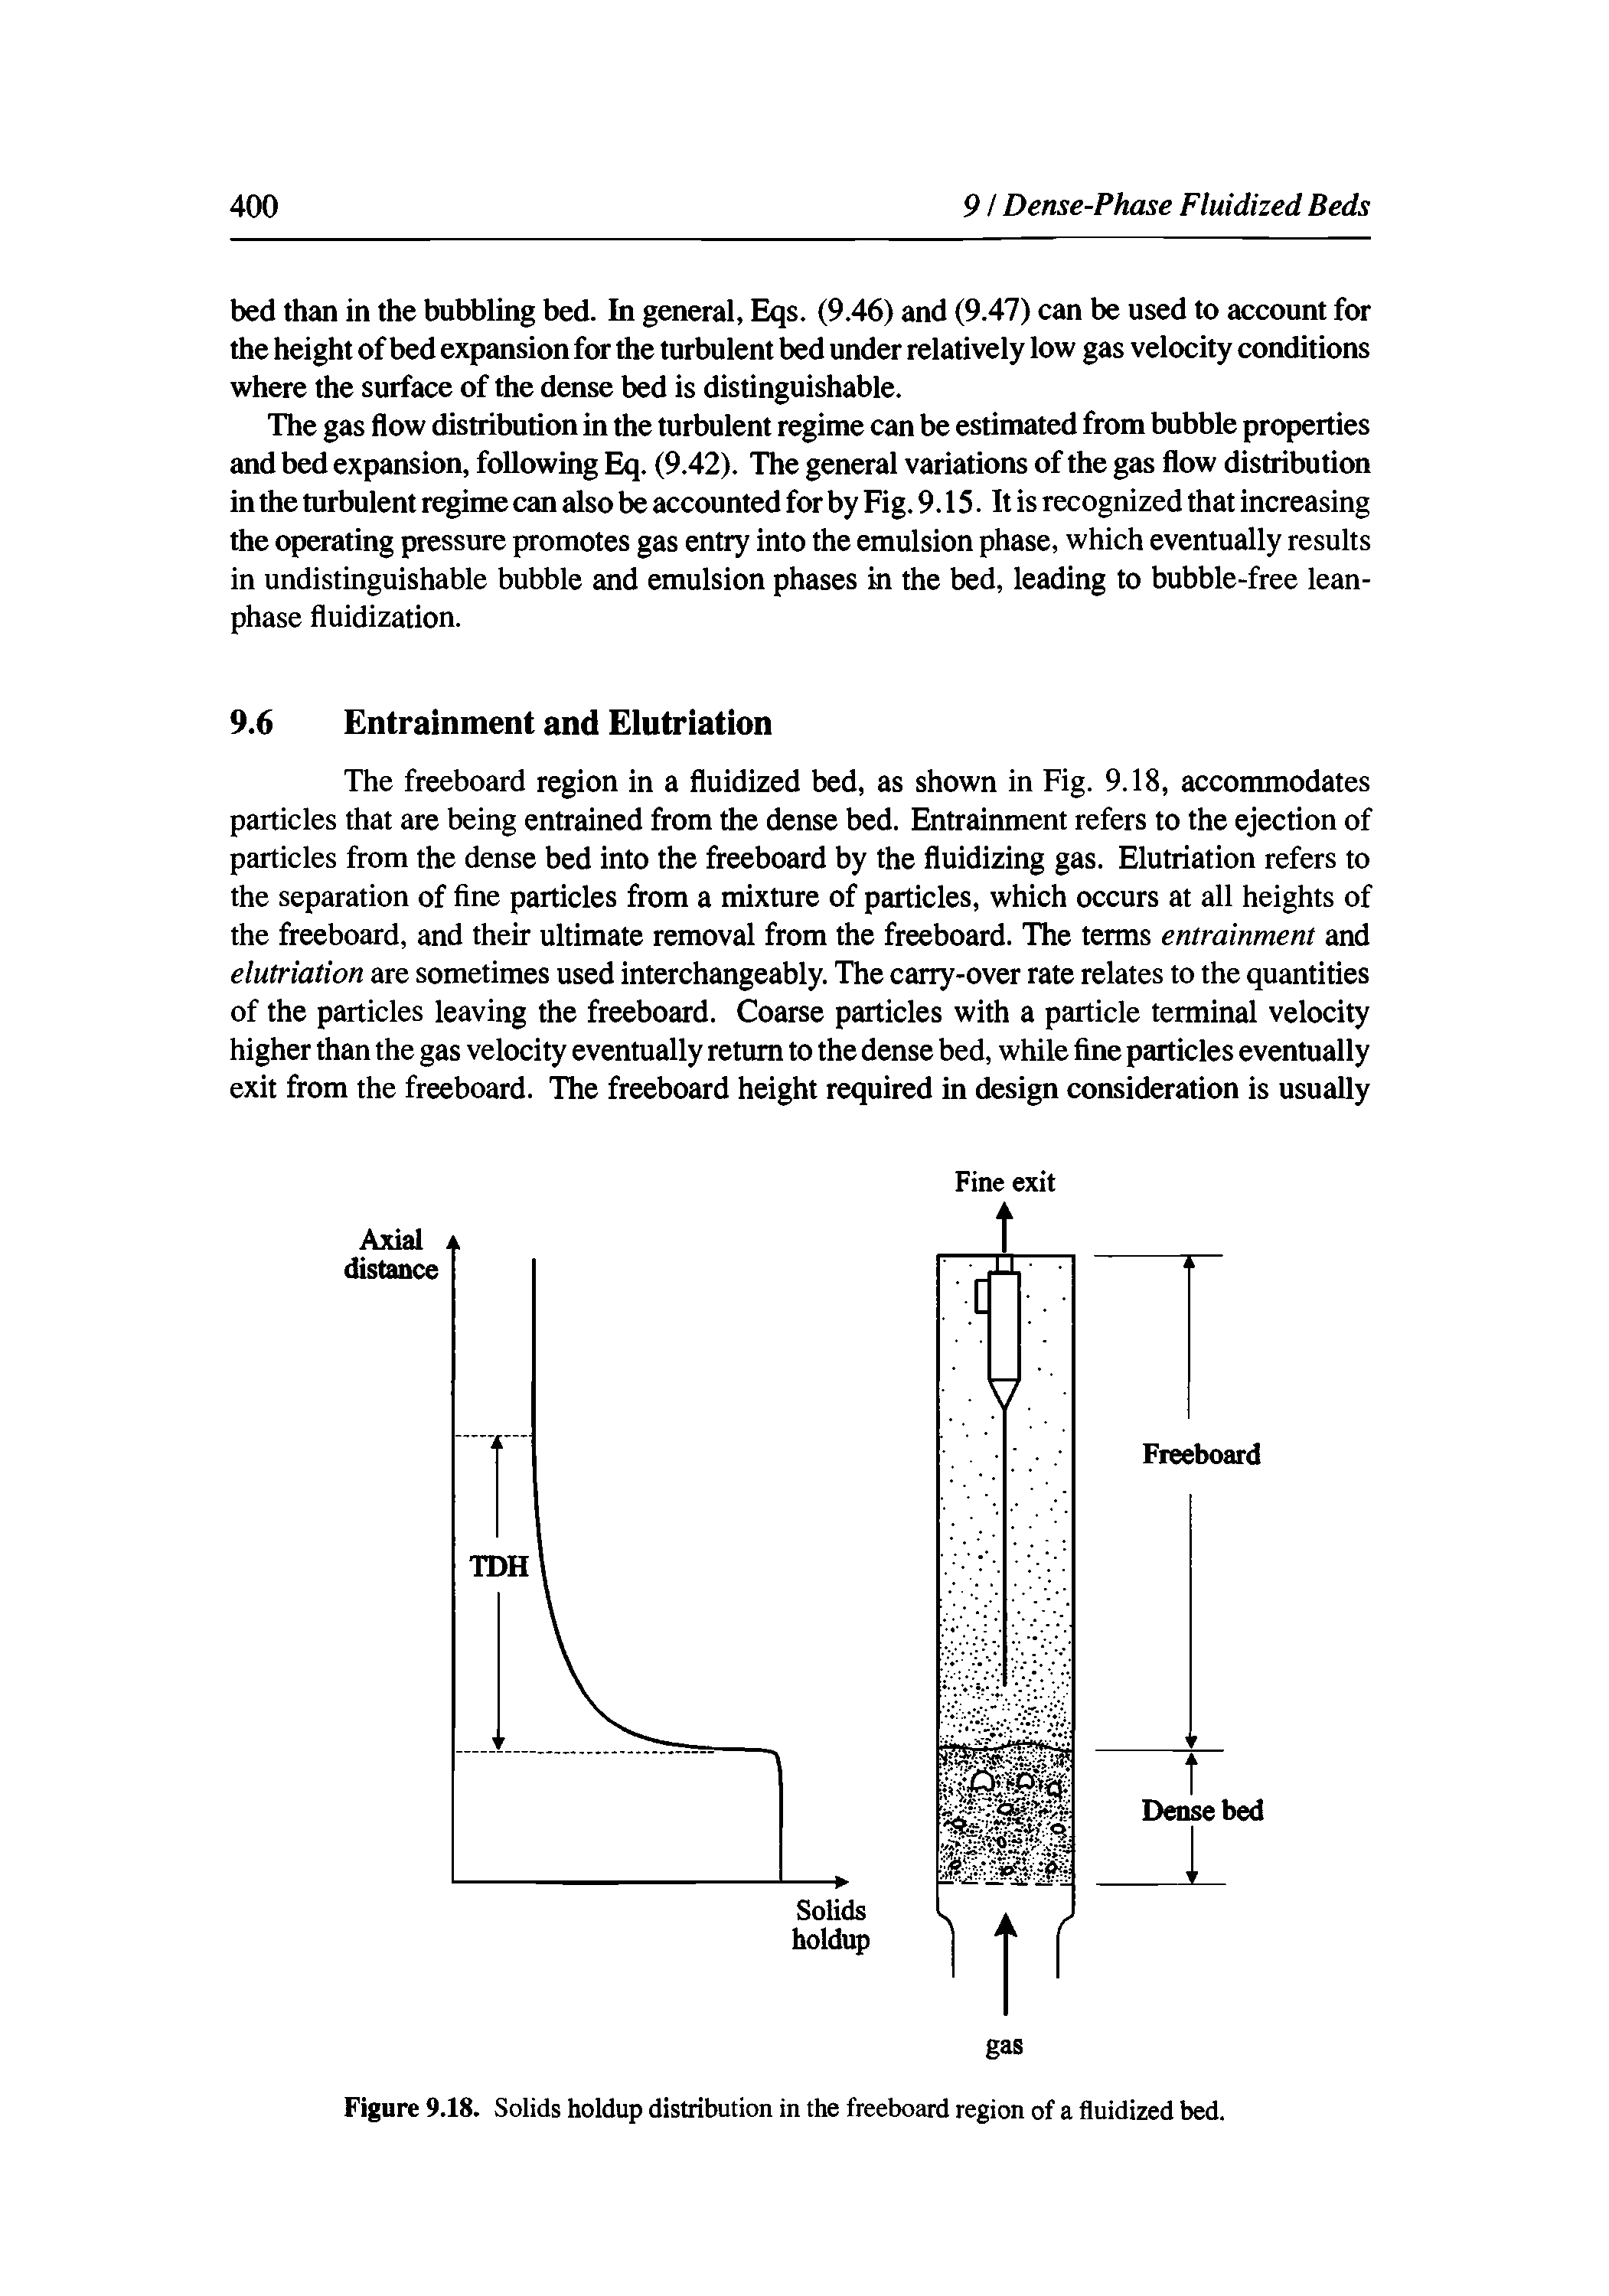 Figure 9.18. Solids holdup distribution in the freeboard region of a fluidized bed.